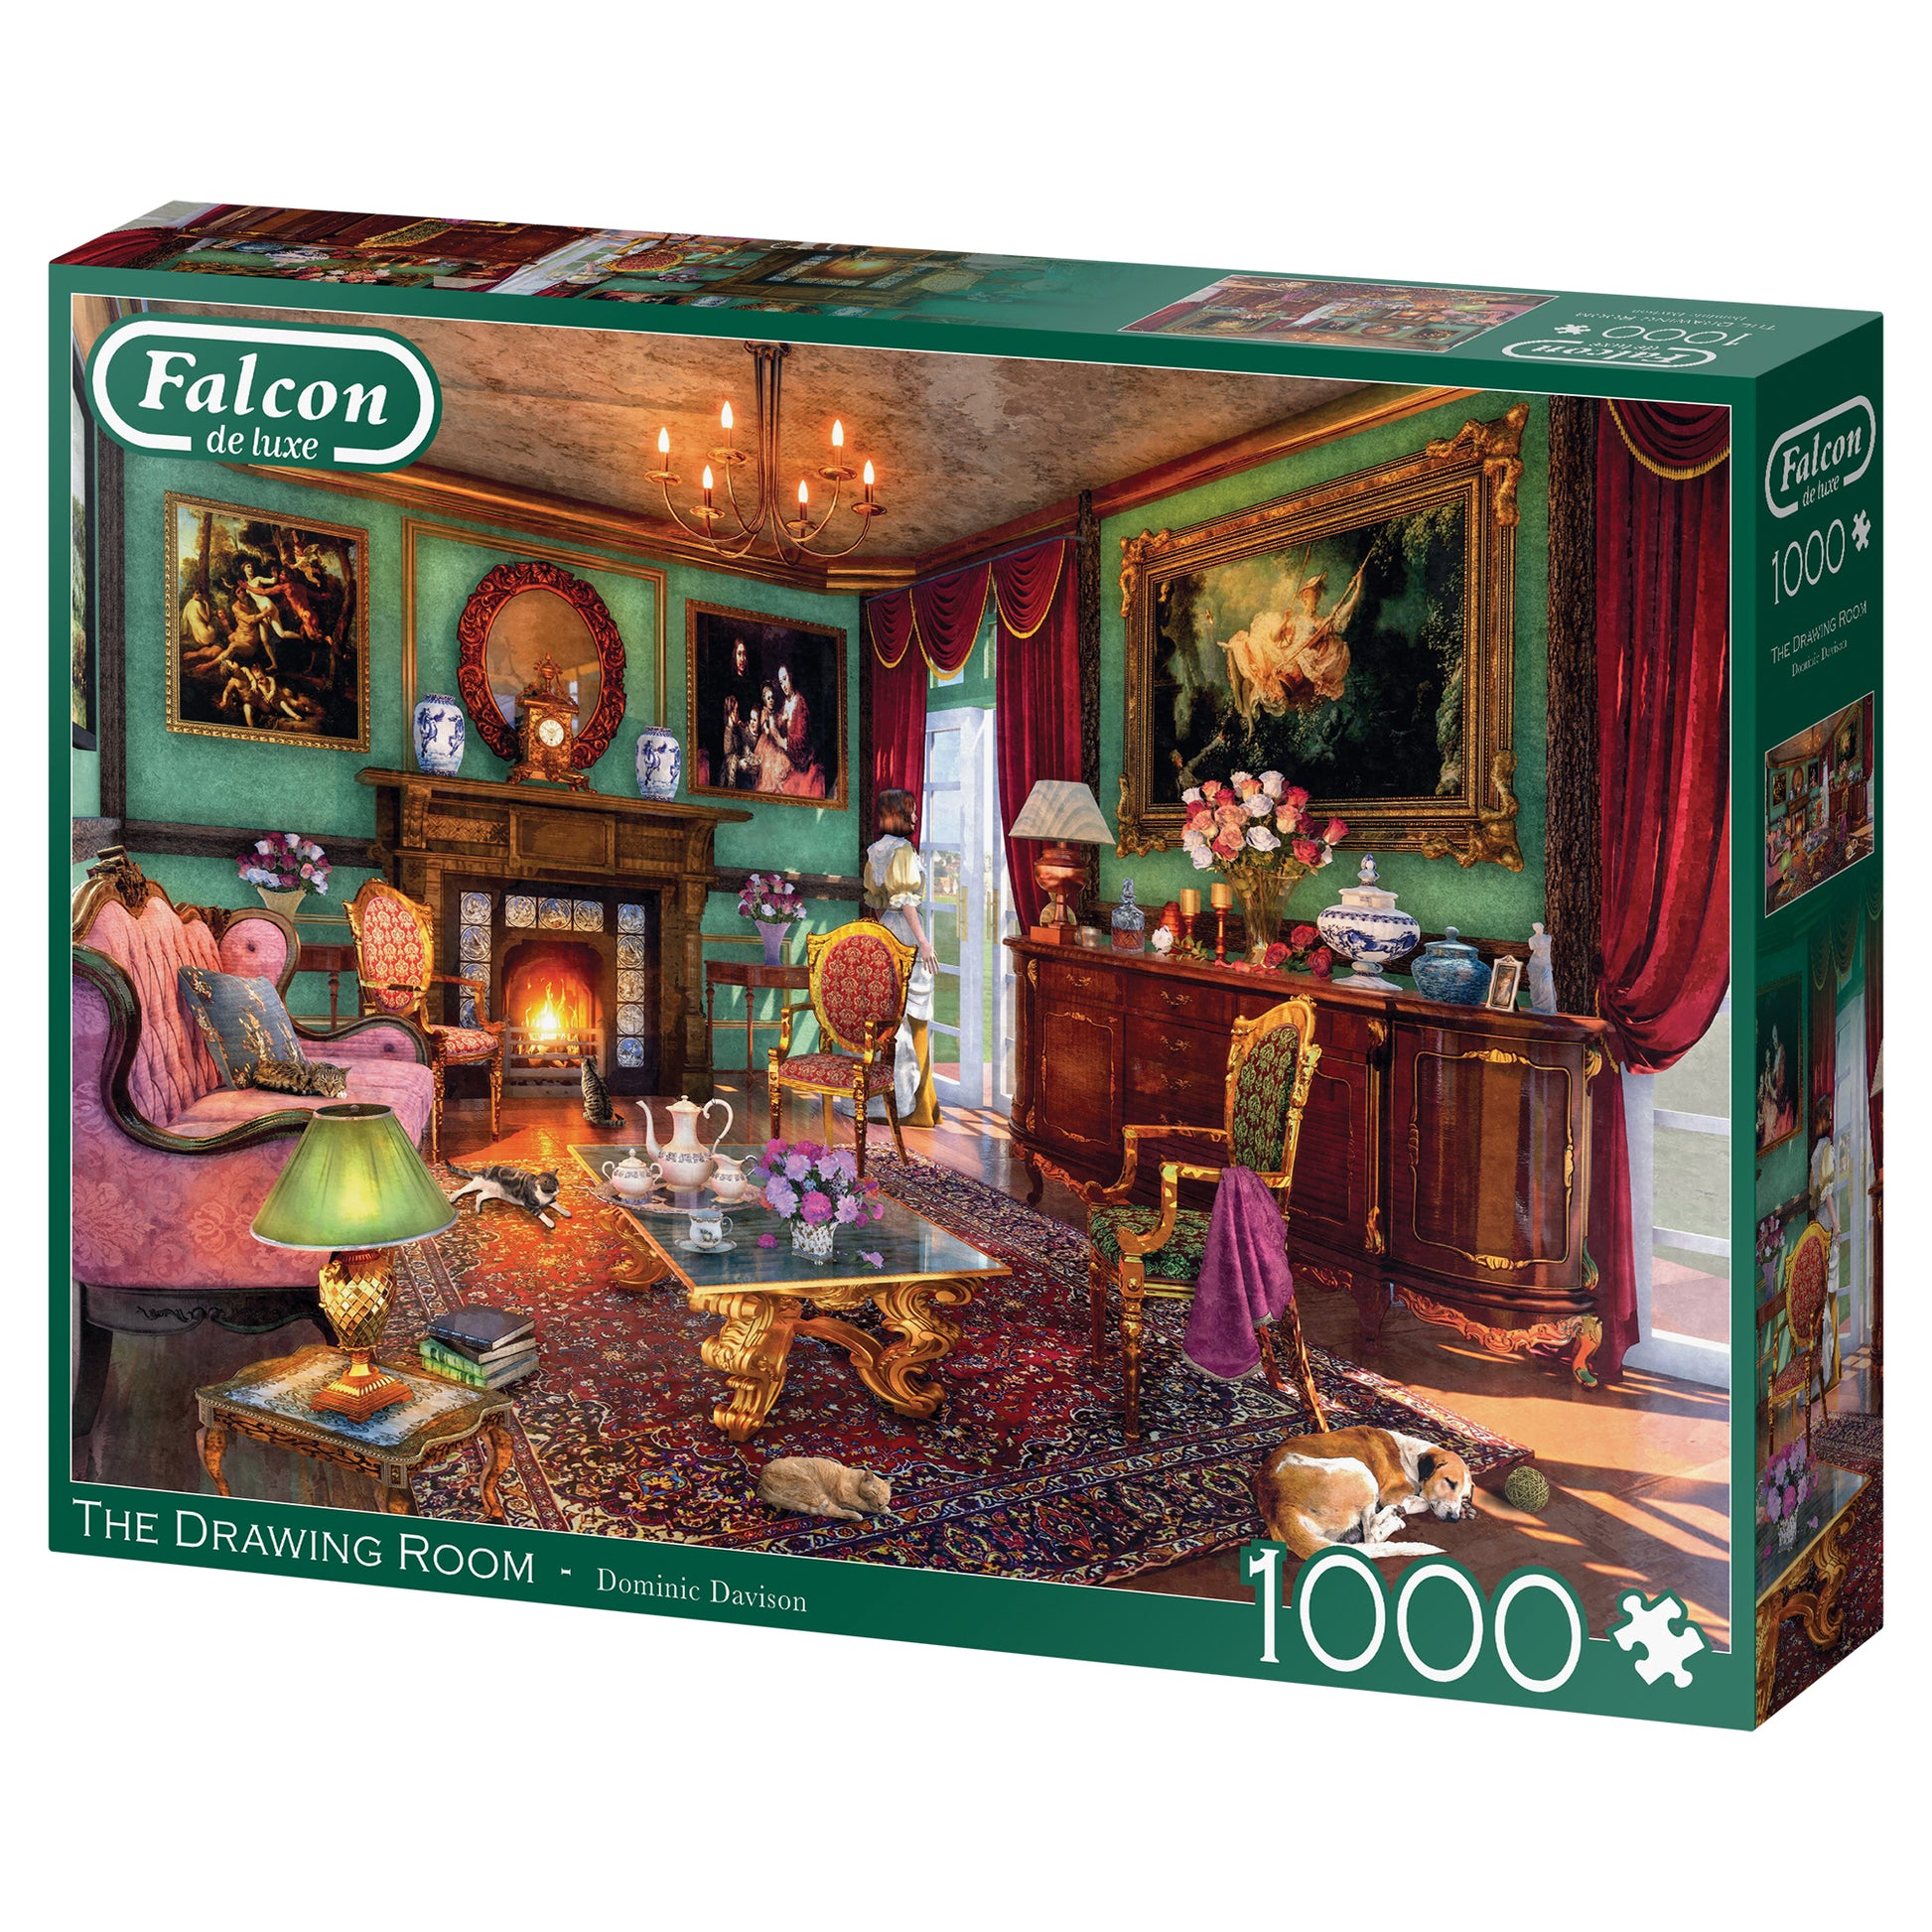 Falcon - The Drawing Room (1000 pieces) - product image - Jumboplay.com